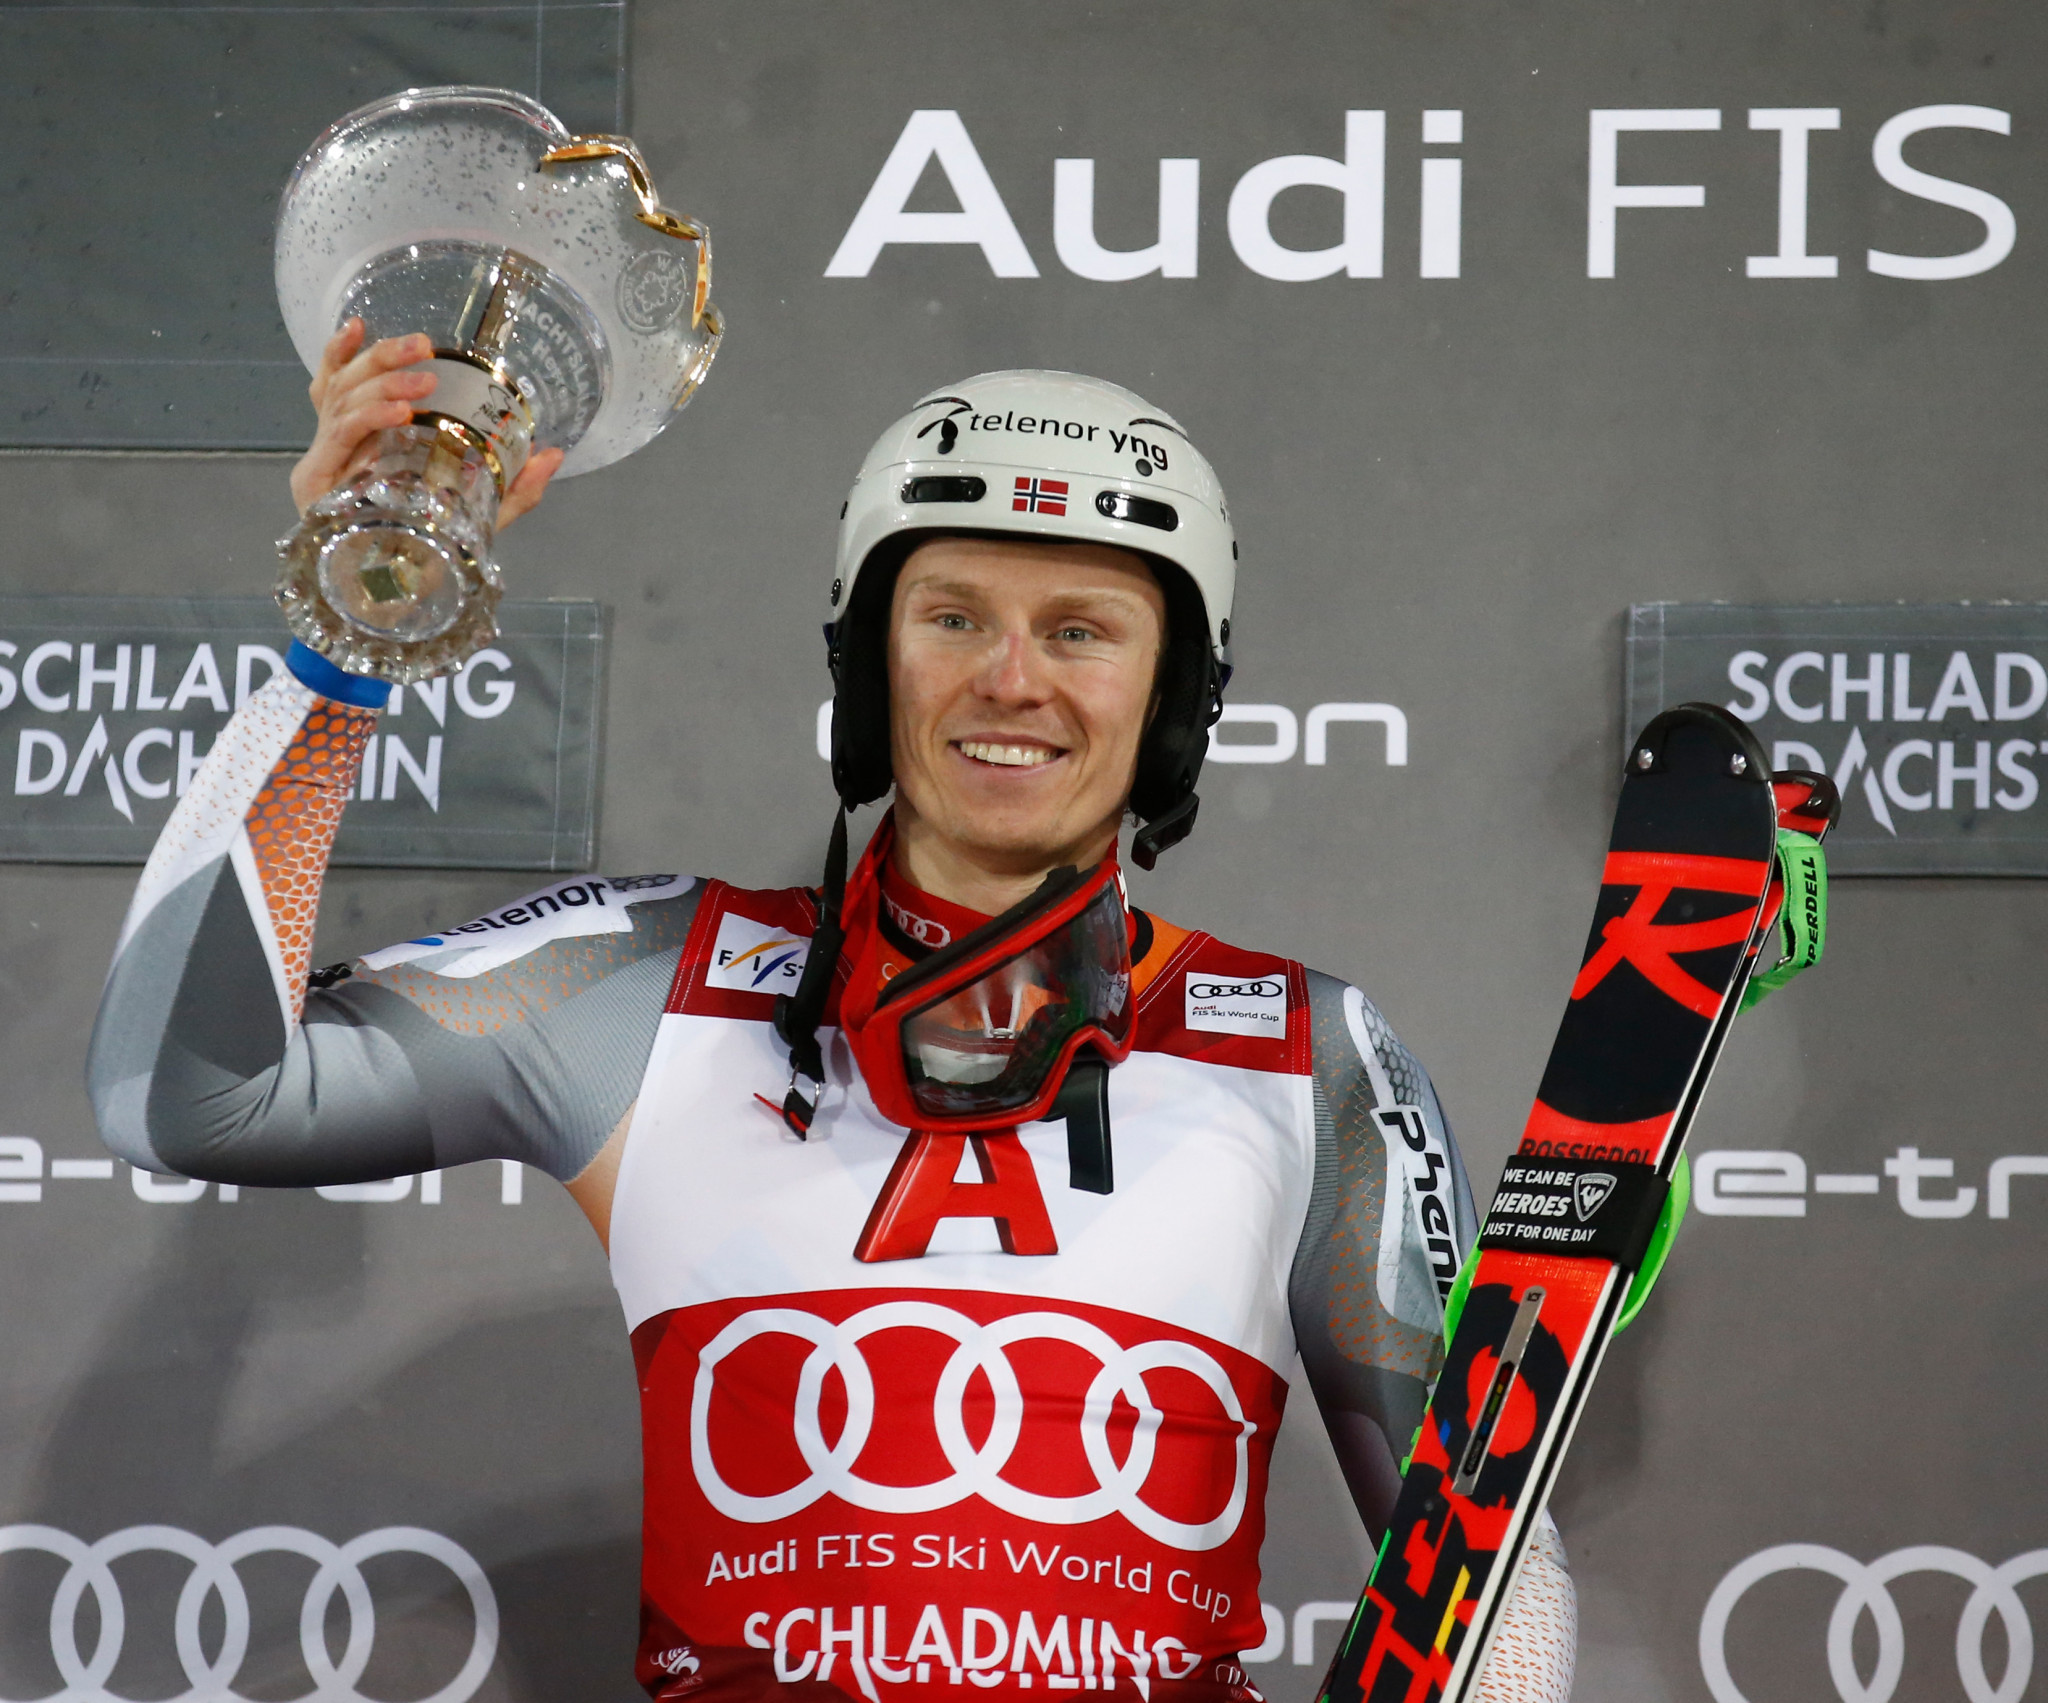 Kristoffersen extends lead in FIS Alpine Ski World Cup standings with slalom win in Schladming